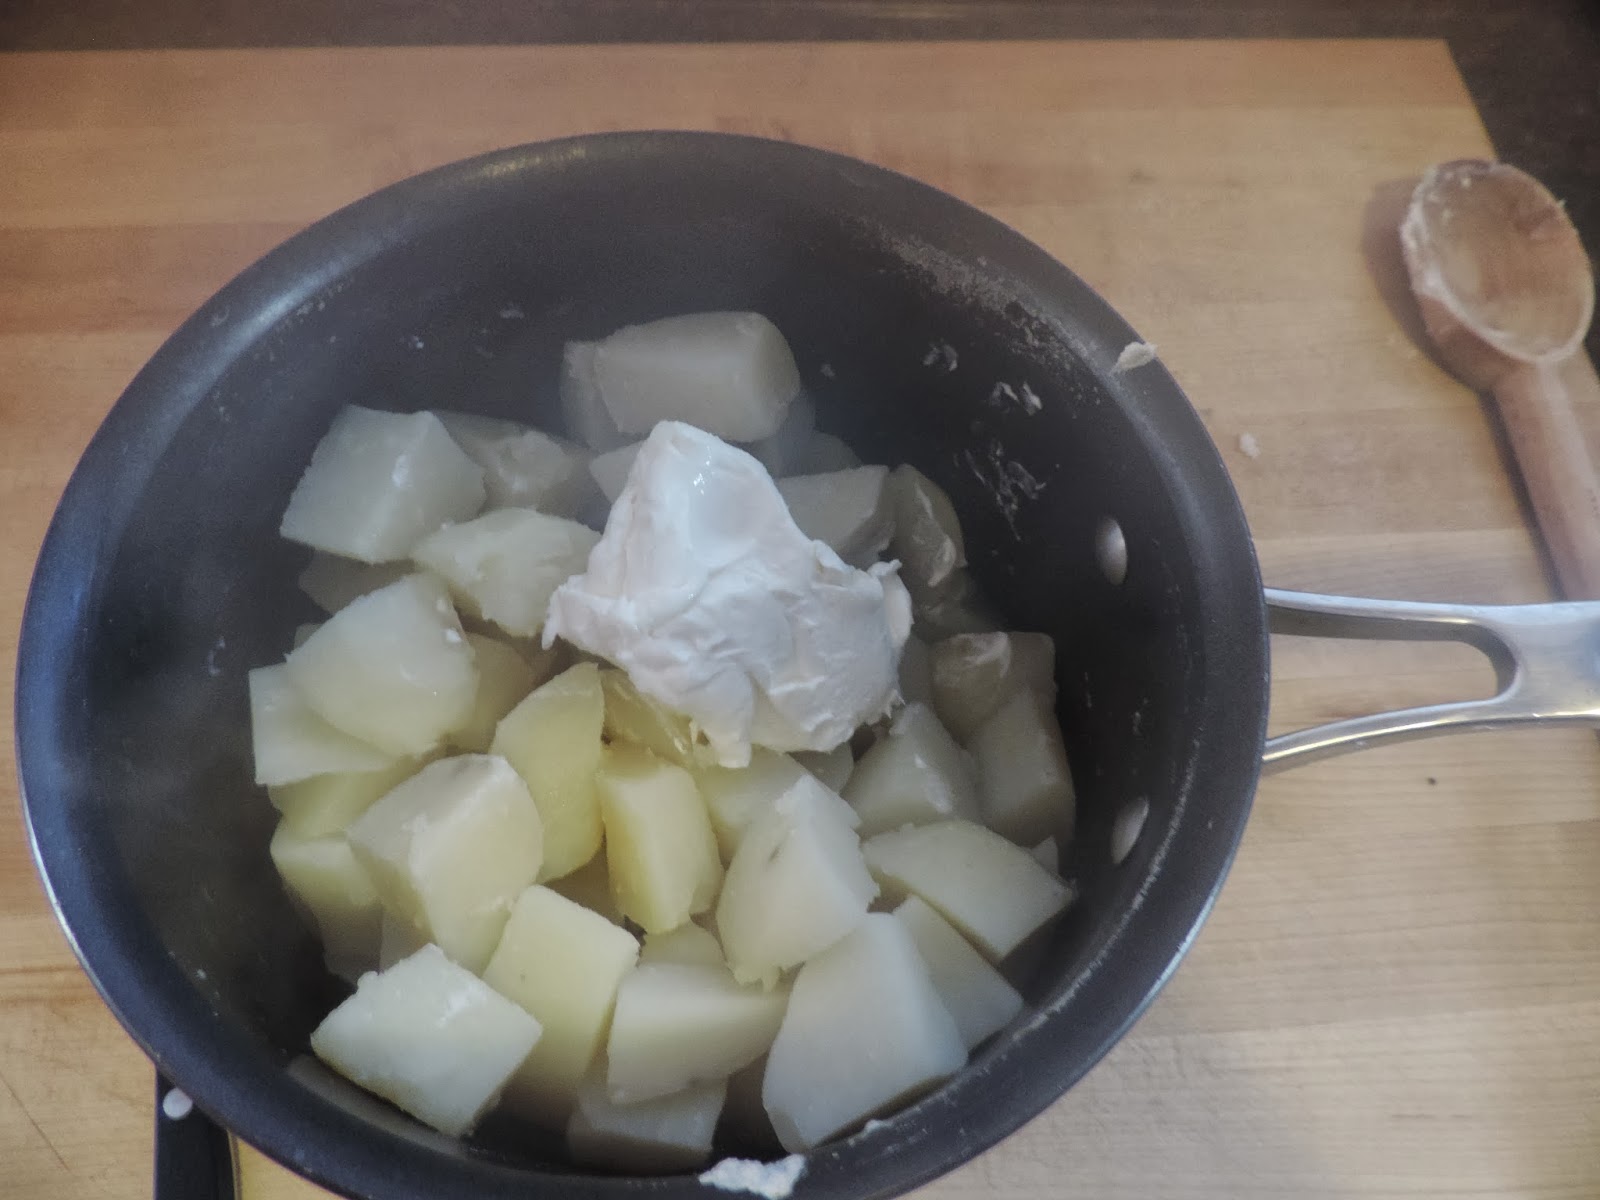 Cream Cheese being added to the cooked potatoes.  